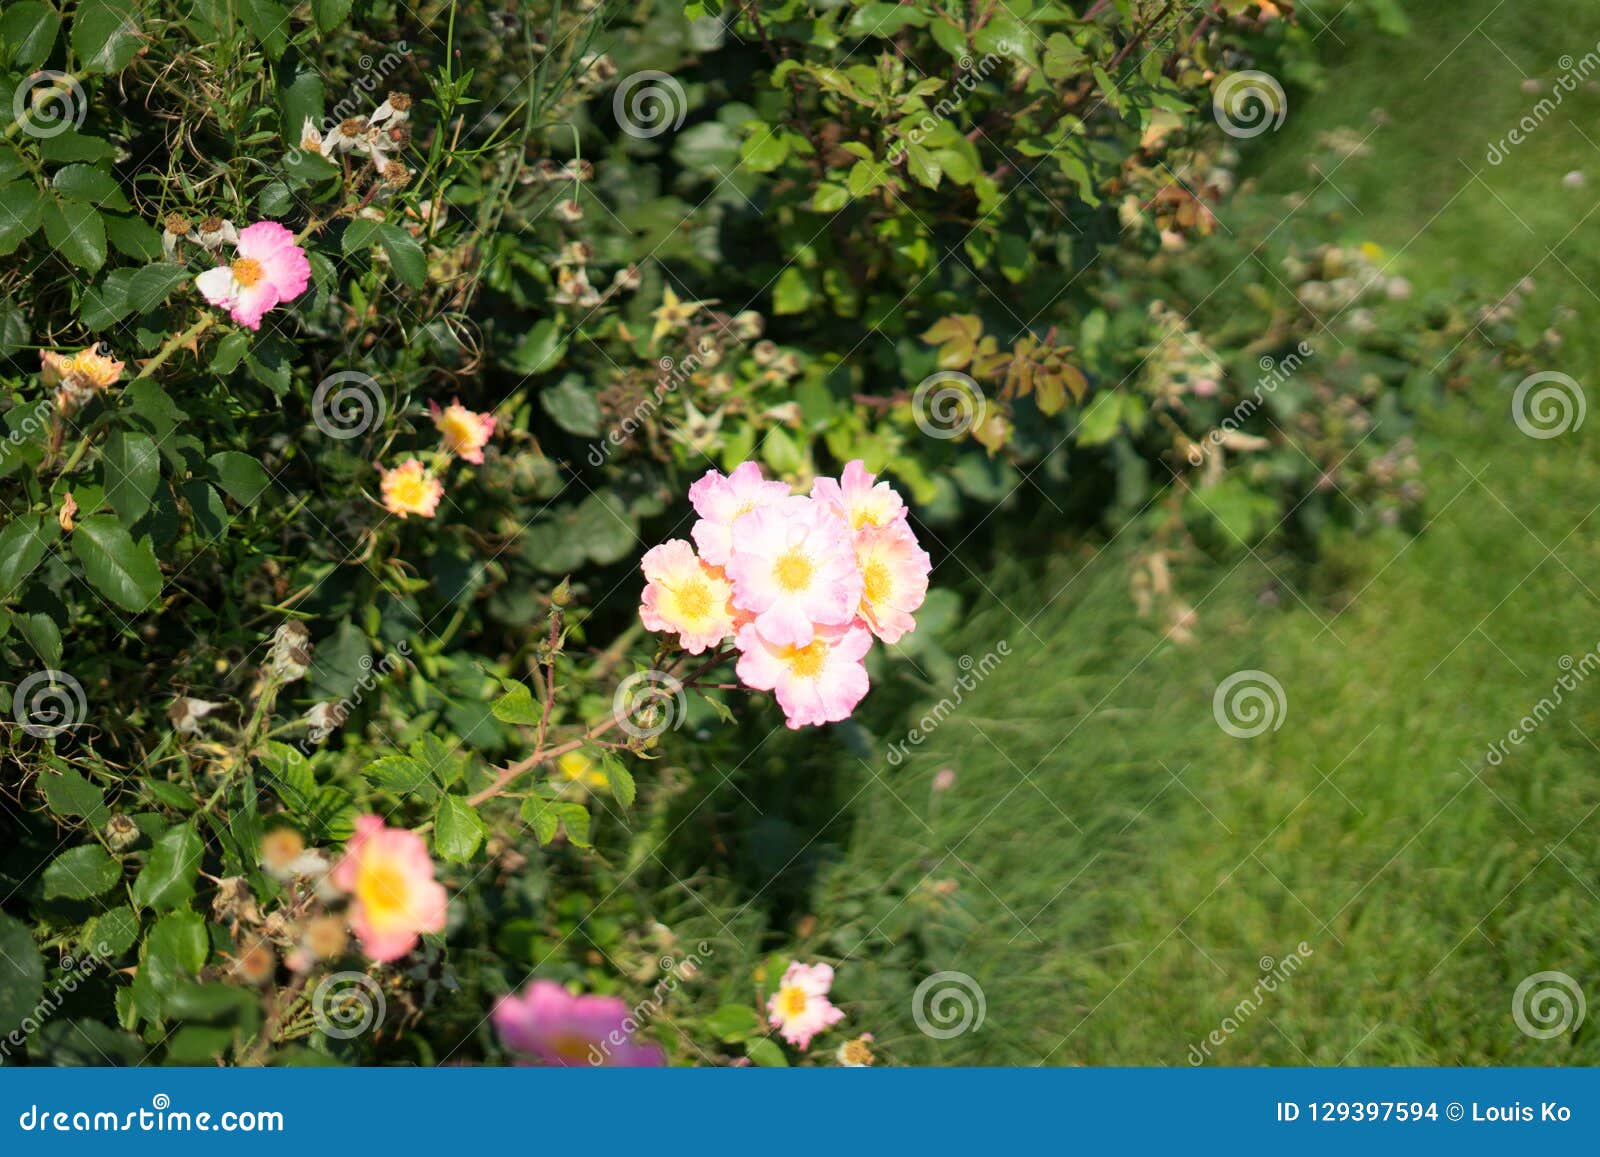 White Rose In Rose Gardens Stock Photo Image Of Blooming 129397594